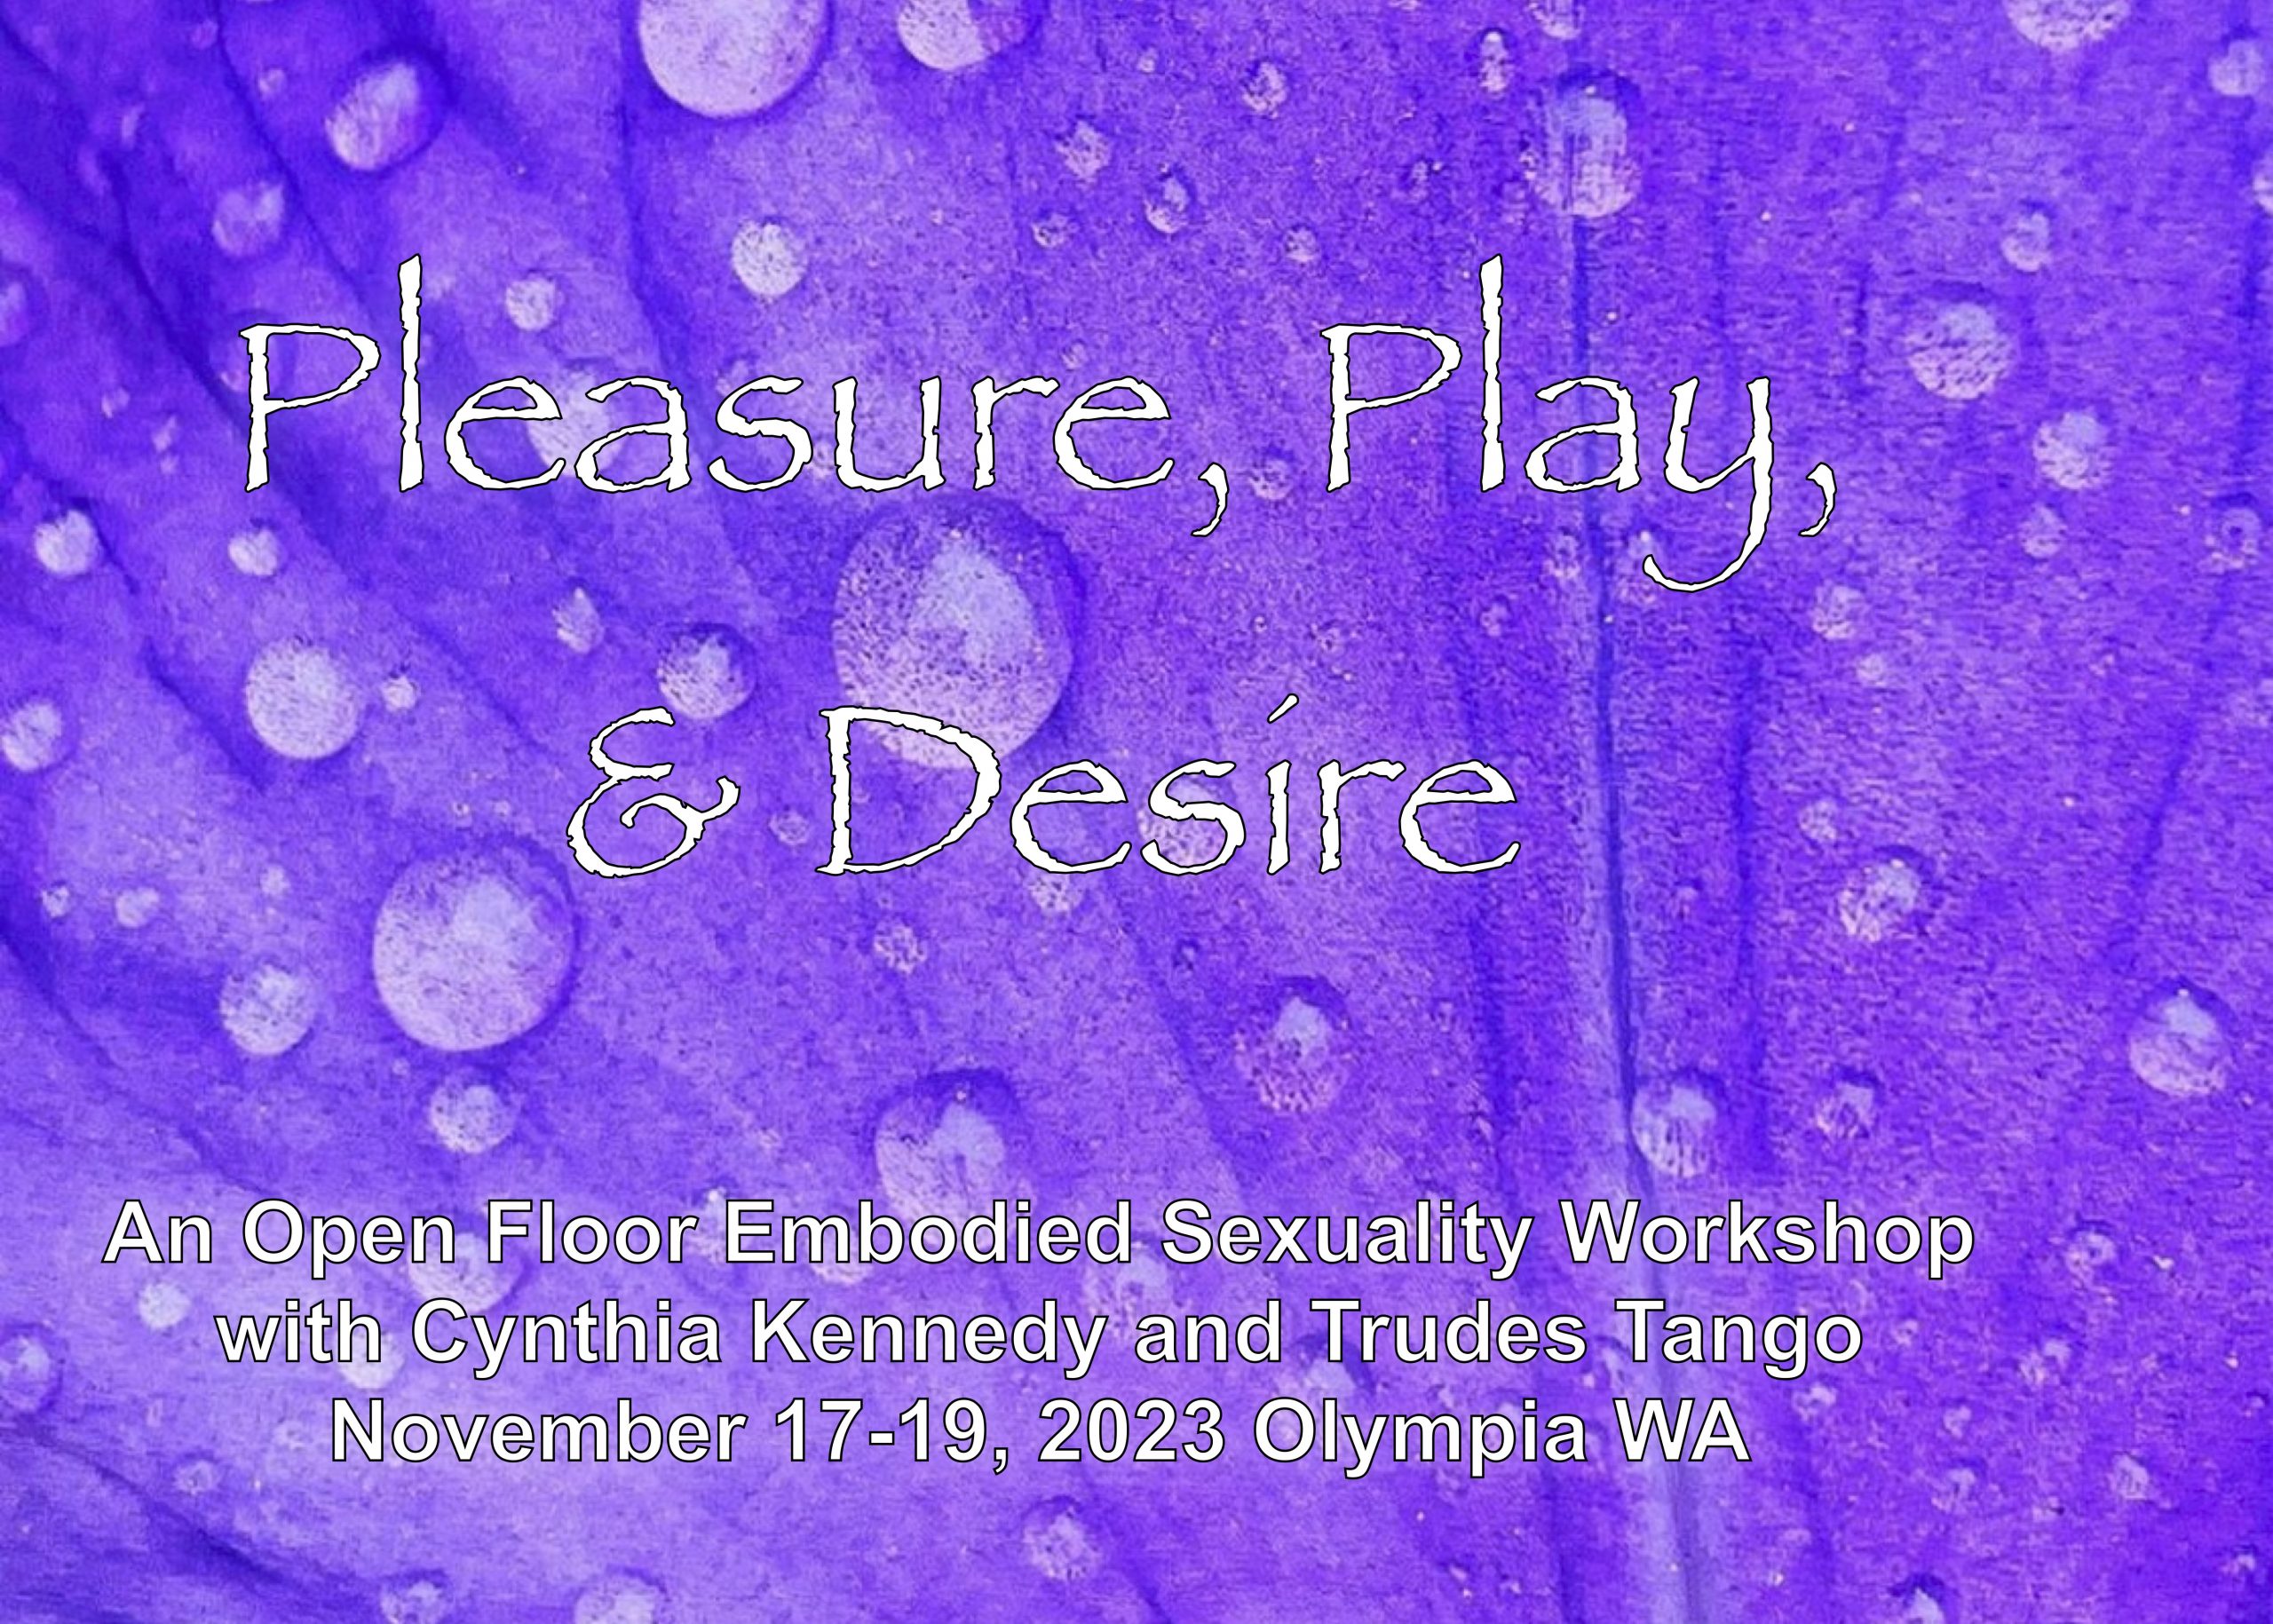 Pleasure, Play, and Desire: An Open Floor Embodied Sexuality Workshop with Cynthia Kennedy and Trudes Tango. November 17-10th 2023 in Olympia, WA